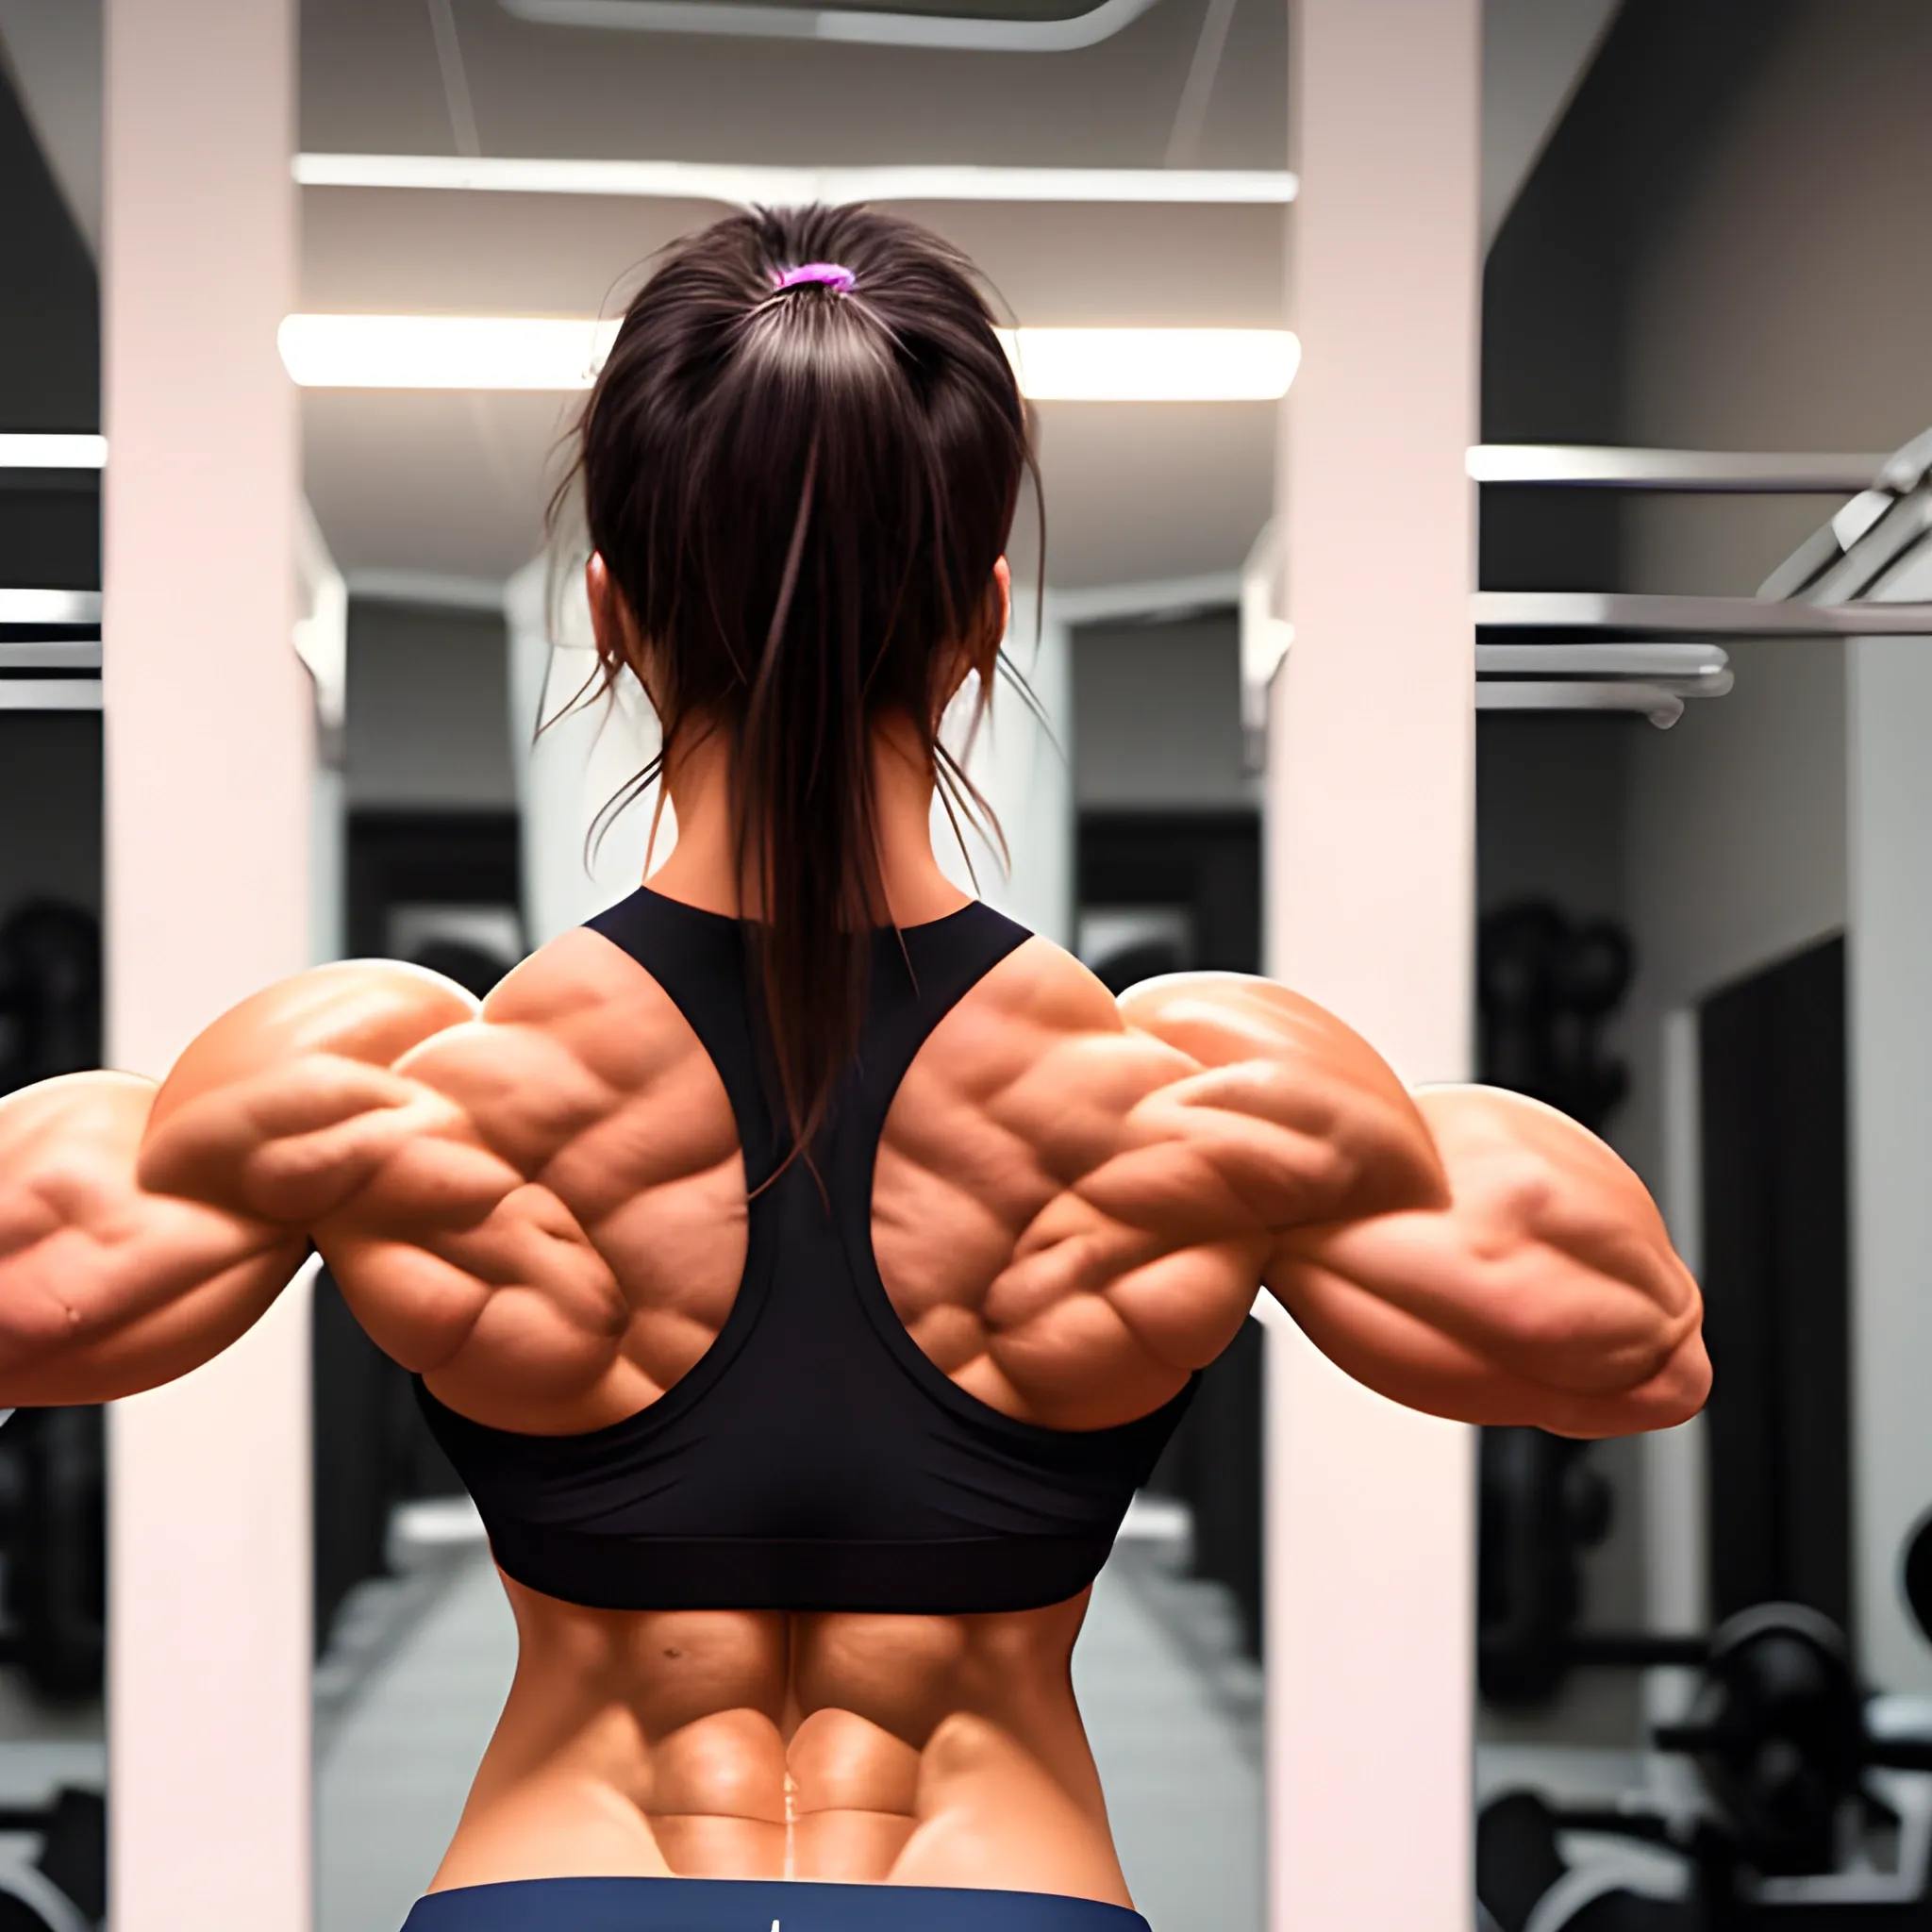 hyper-fit woman, above average musculature, very wide back, larg